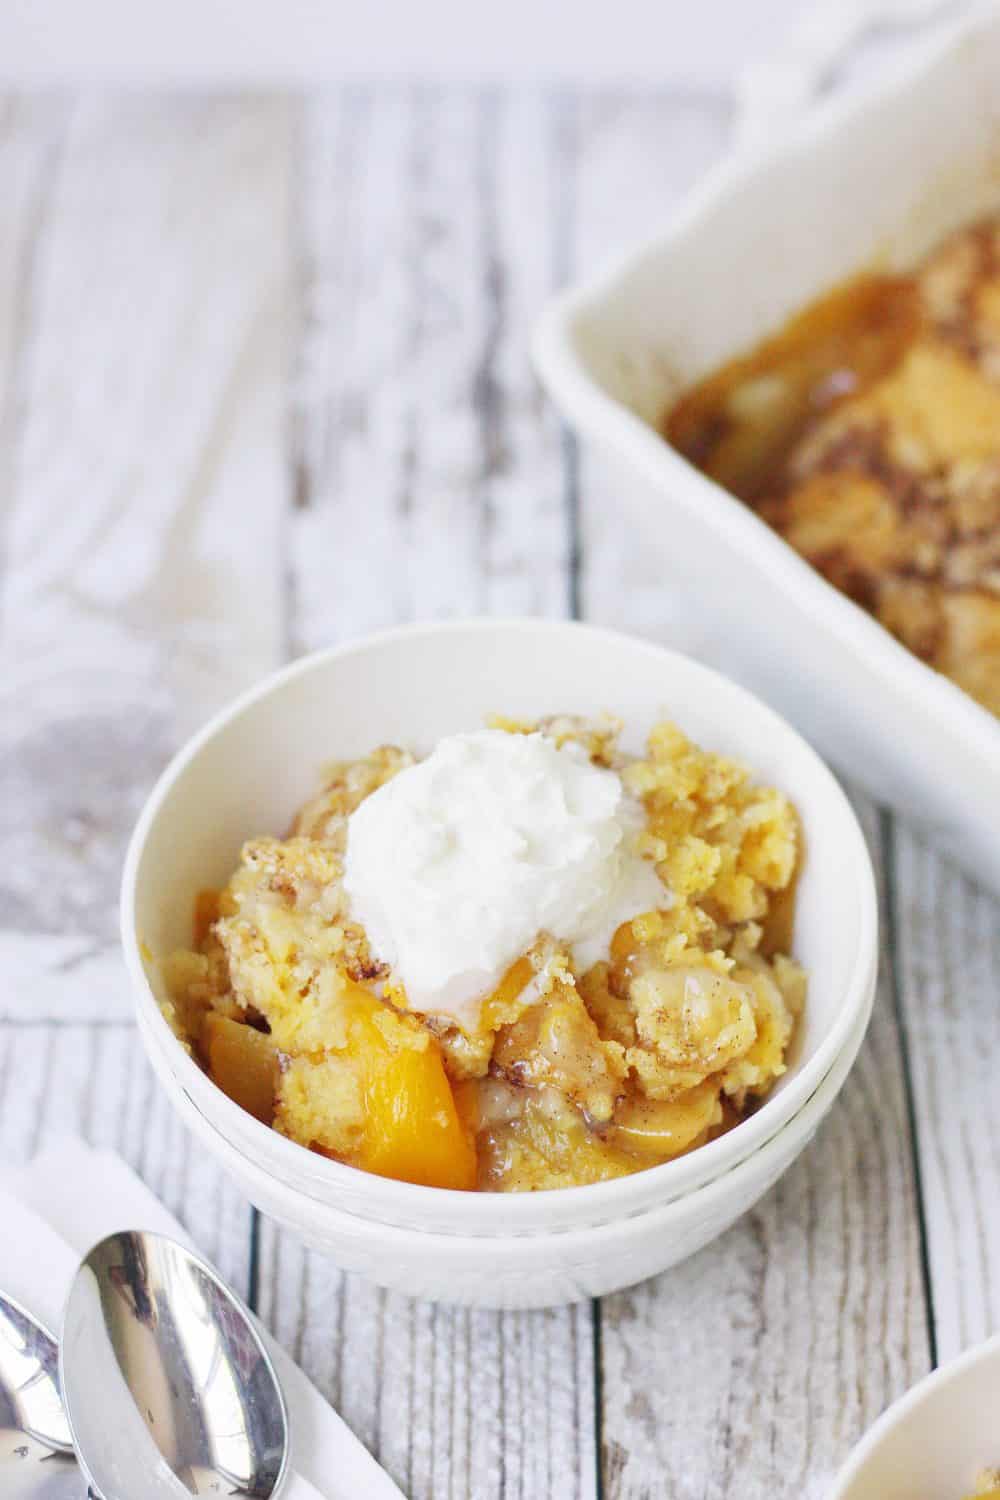 Easy Peach Cobbler Dump Cake -- Easy peach cobbler dump cake is sure to become a summer staple! This mouthwatering peach cobbler recipe requires only four ingredients and five minutes of prep! #cake #peachcobbler #dumpcake #dessert #easyrecipe #cakemix #cobbler #peach